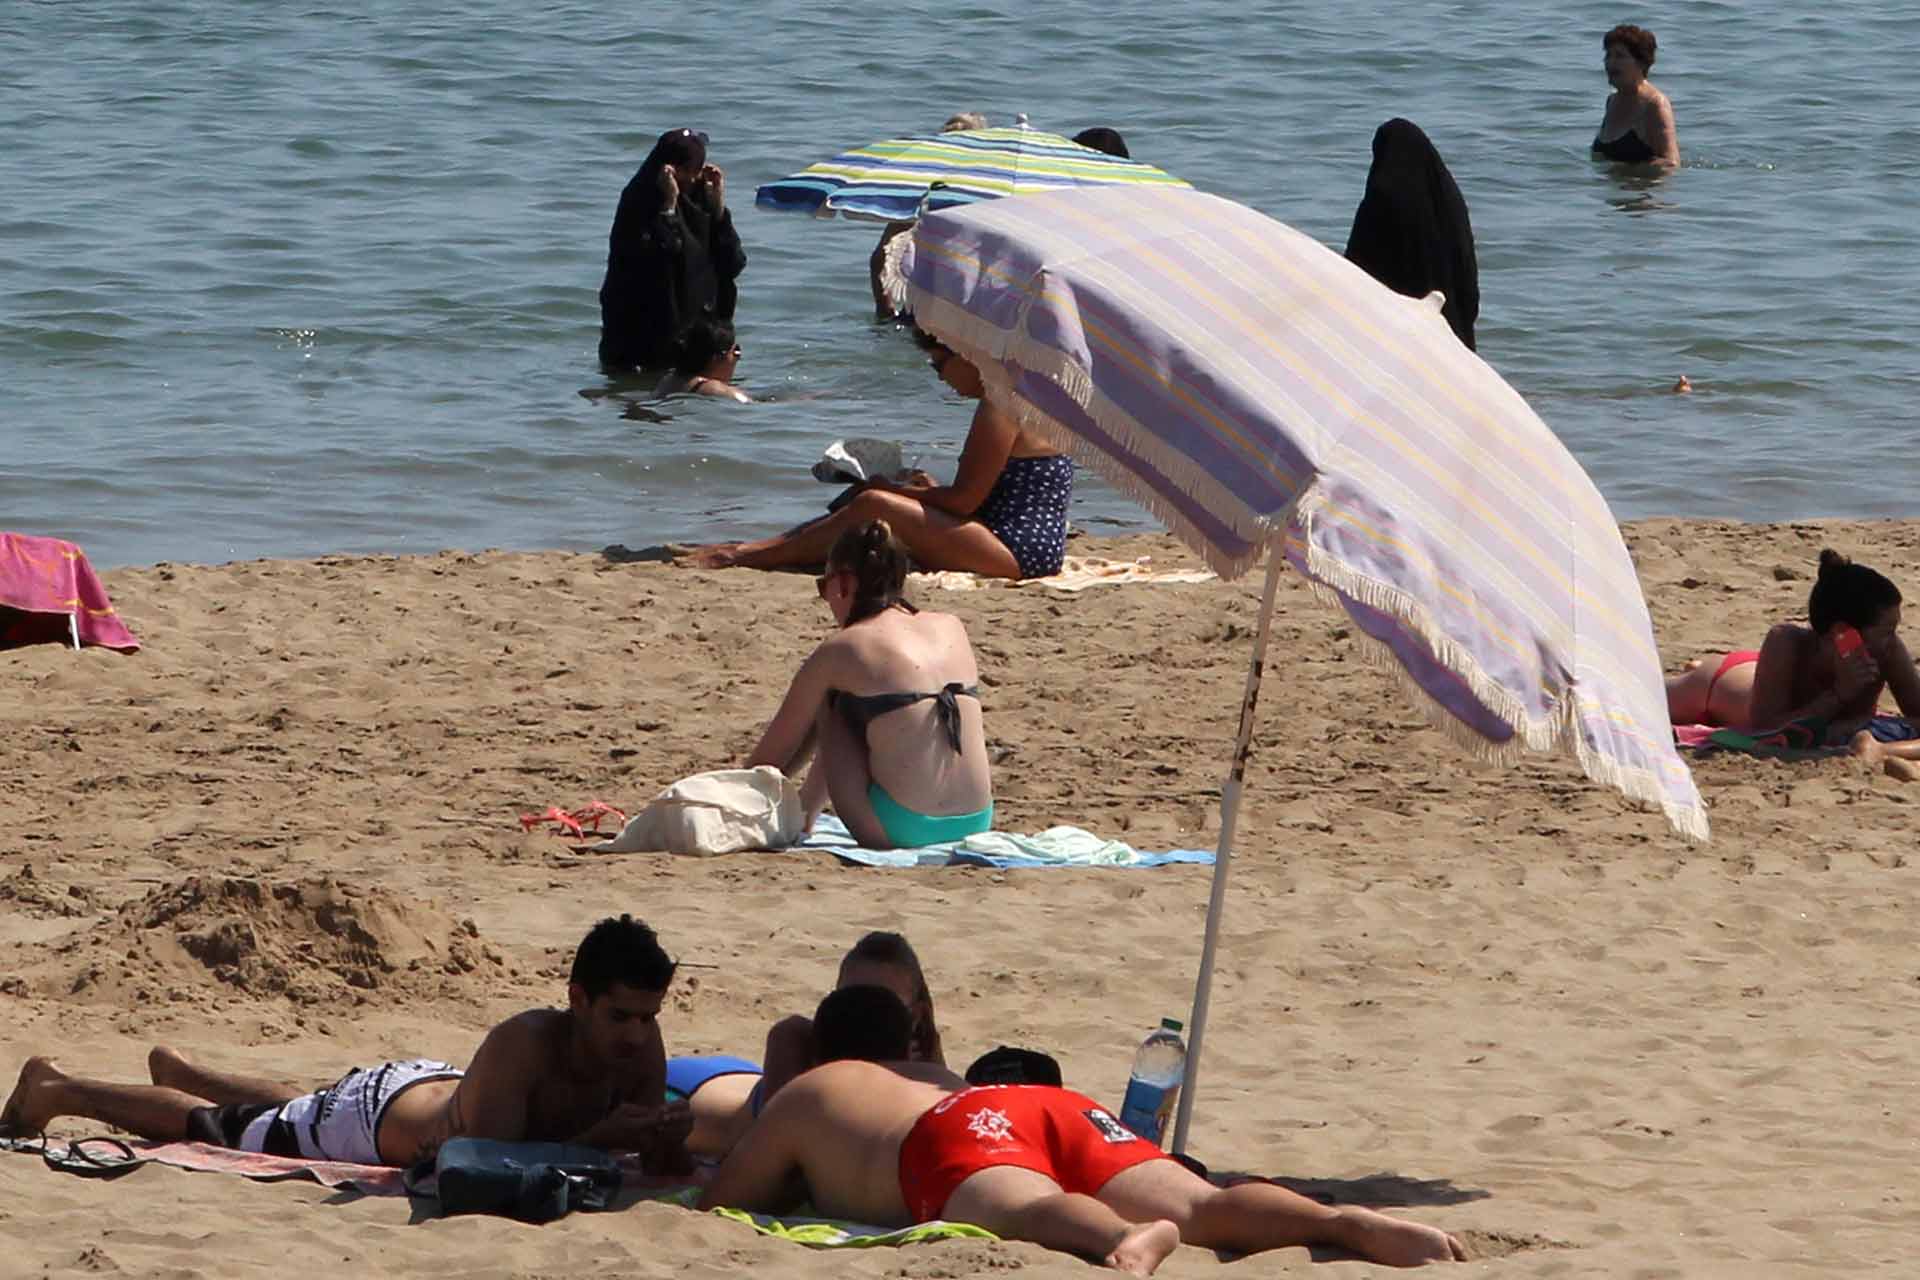 A photo taken on June 4, 2015 shows two Muslim women wearing chador as they enjoy their time with other people a beach of Narbonne, southern France. (AFP PHOTO / Raymond Roig)